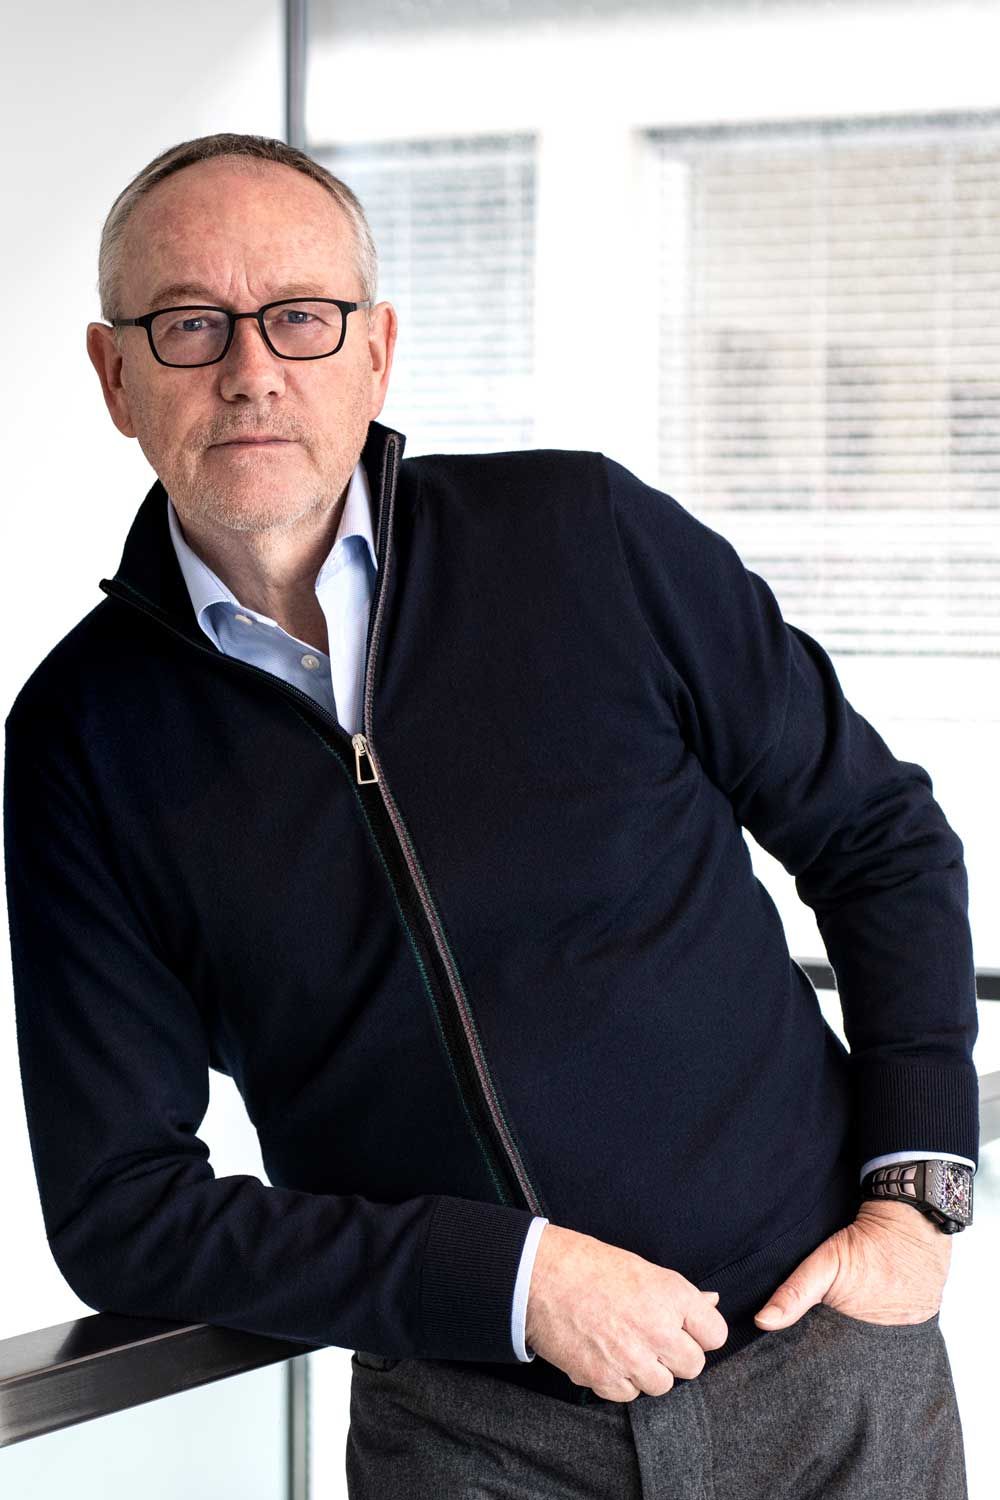 Dominique Guenat, Richard Mille co-founder and co-president